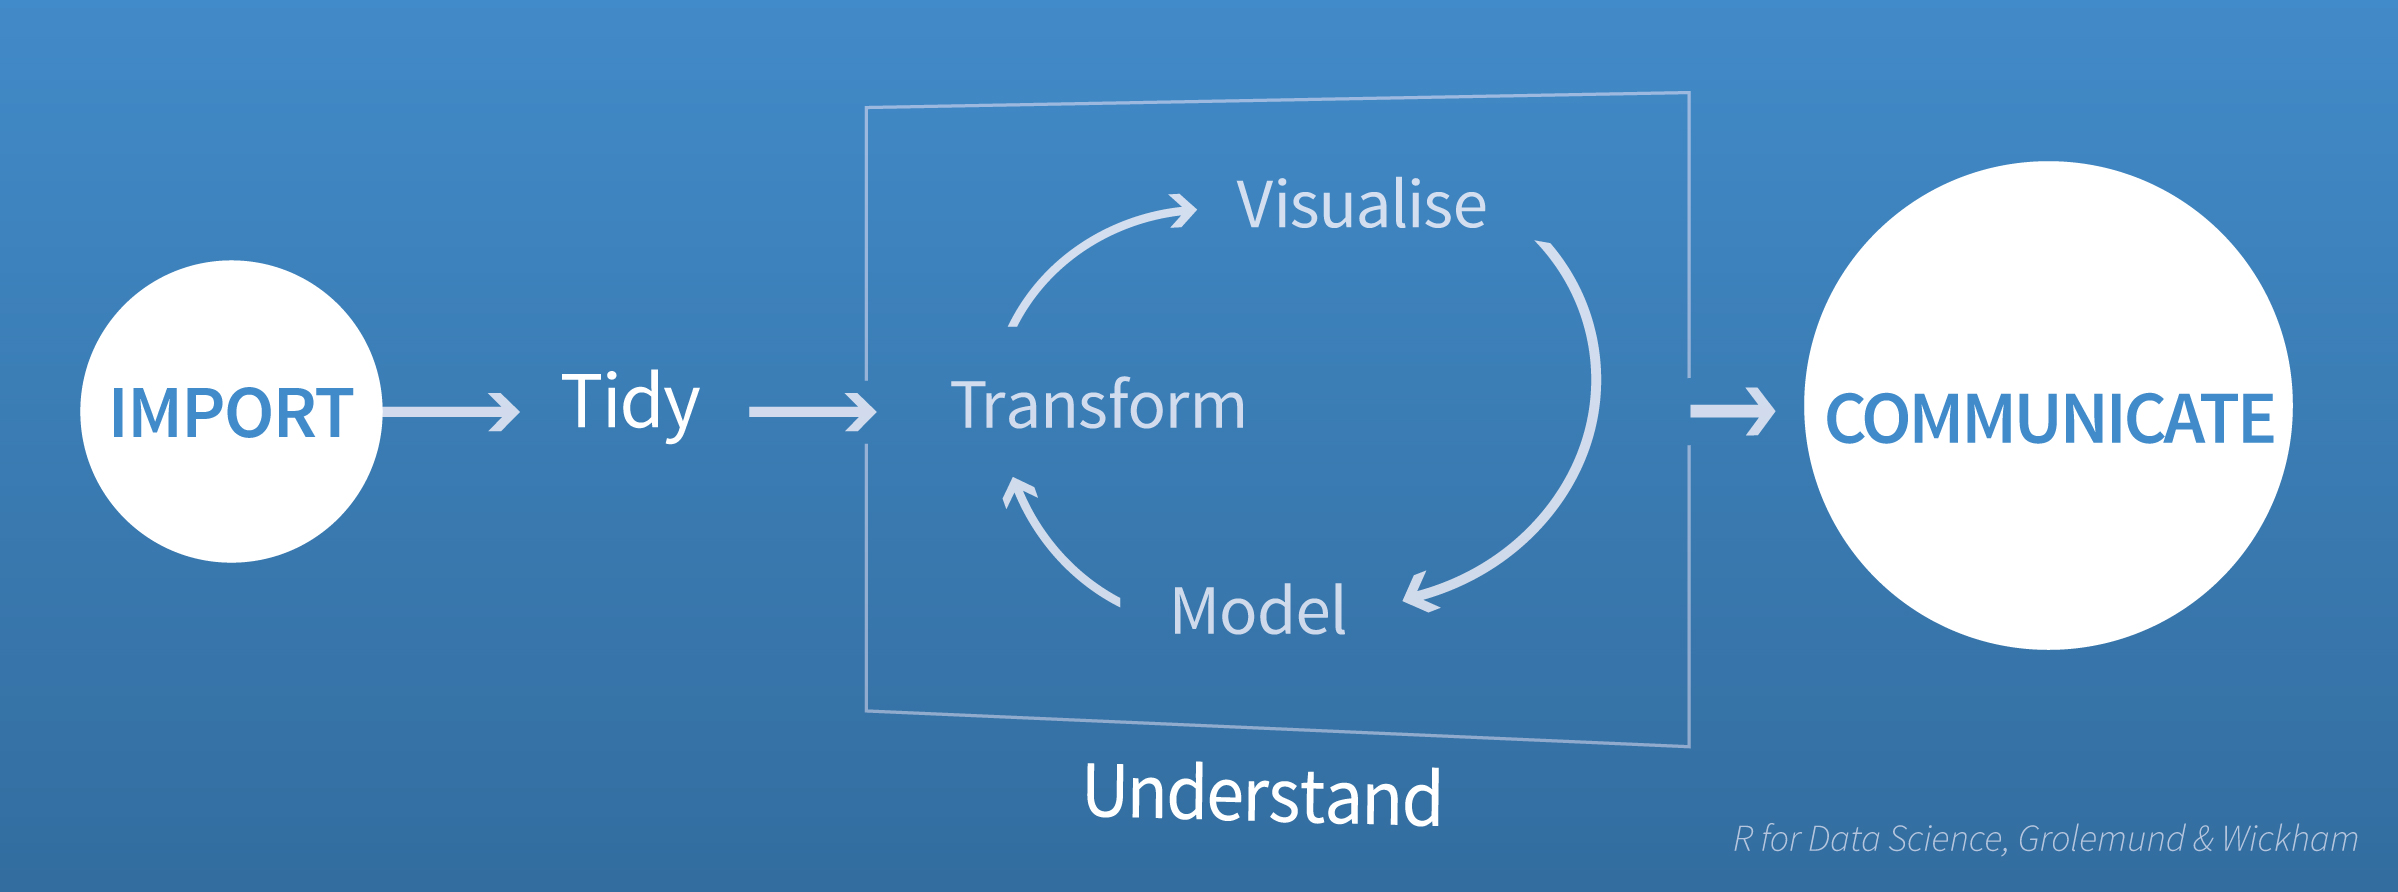 A visualization of the data science process